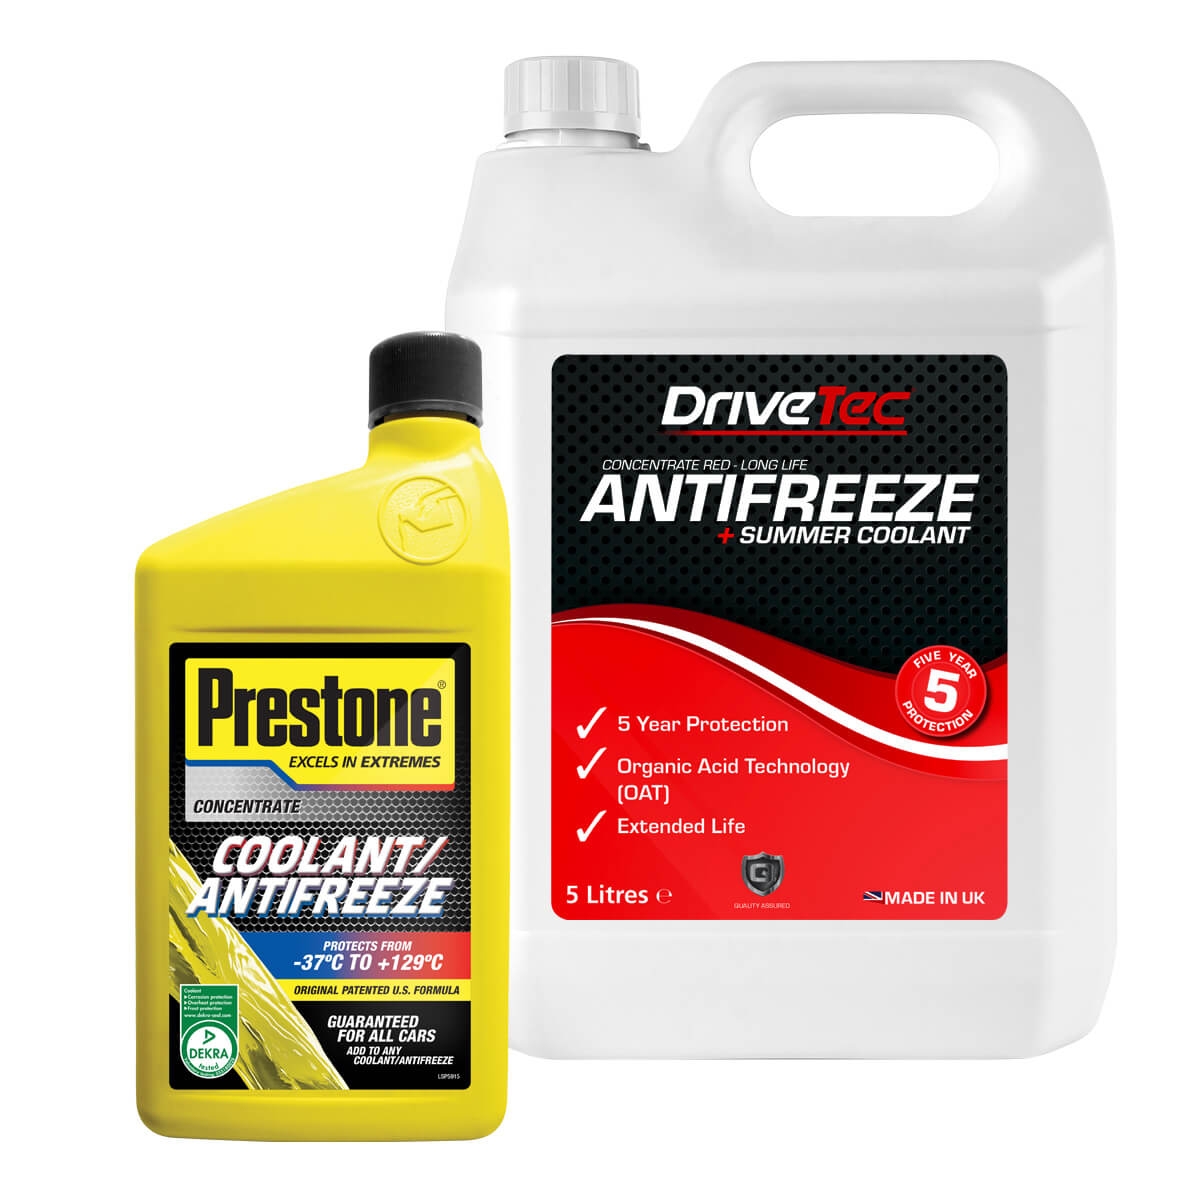 FORD COURIER Antifreeze